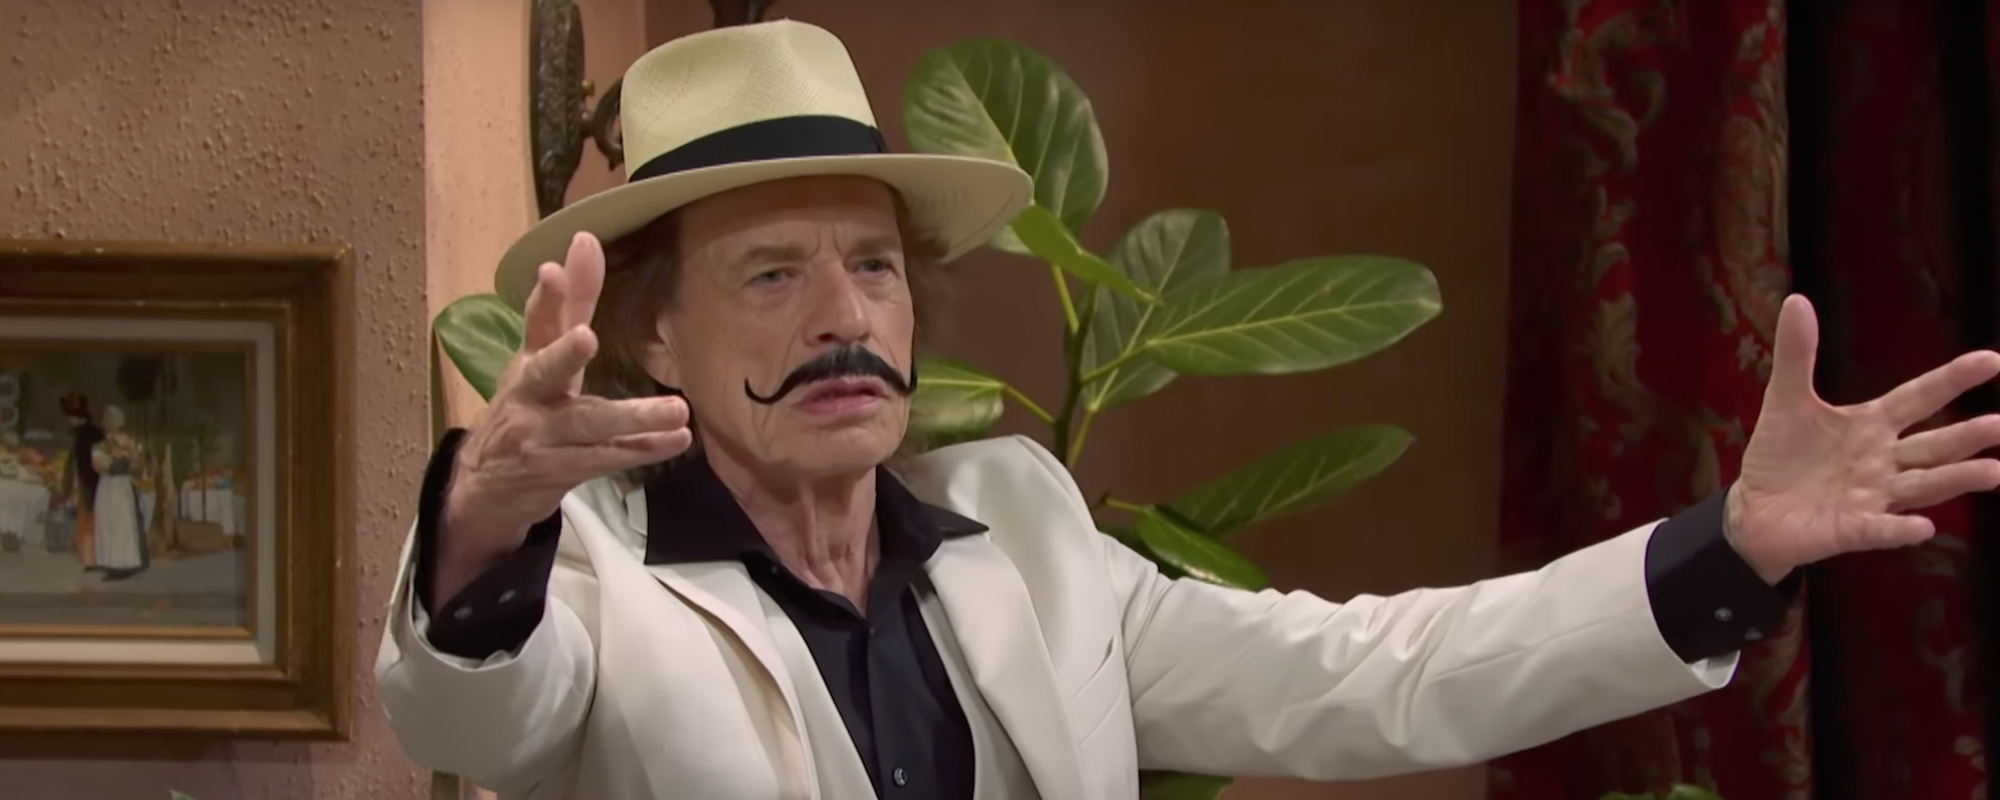 Watch: Mick Jagger Stars in ‘Saturday Night Live’ Skits with Bad Bunny